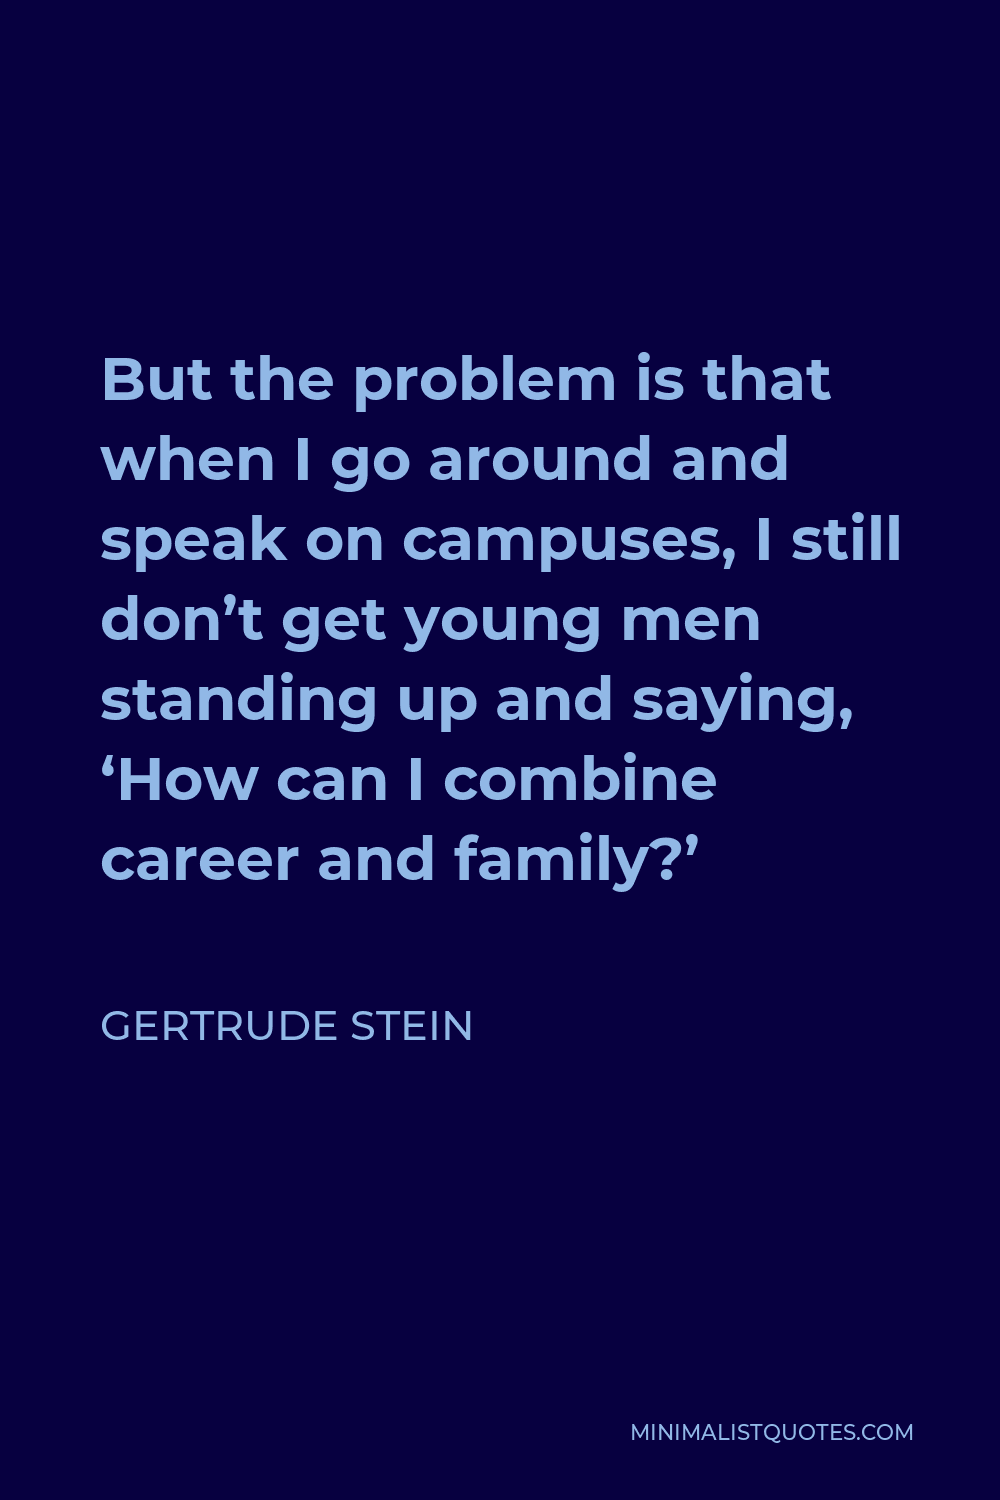 Gertrude Stein Quote - But the problem is that when I go around and speak on campuses, I still don’t get young men standing up and saying, ‘How can I combine career and family?’